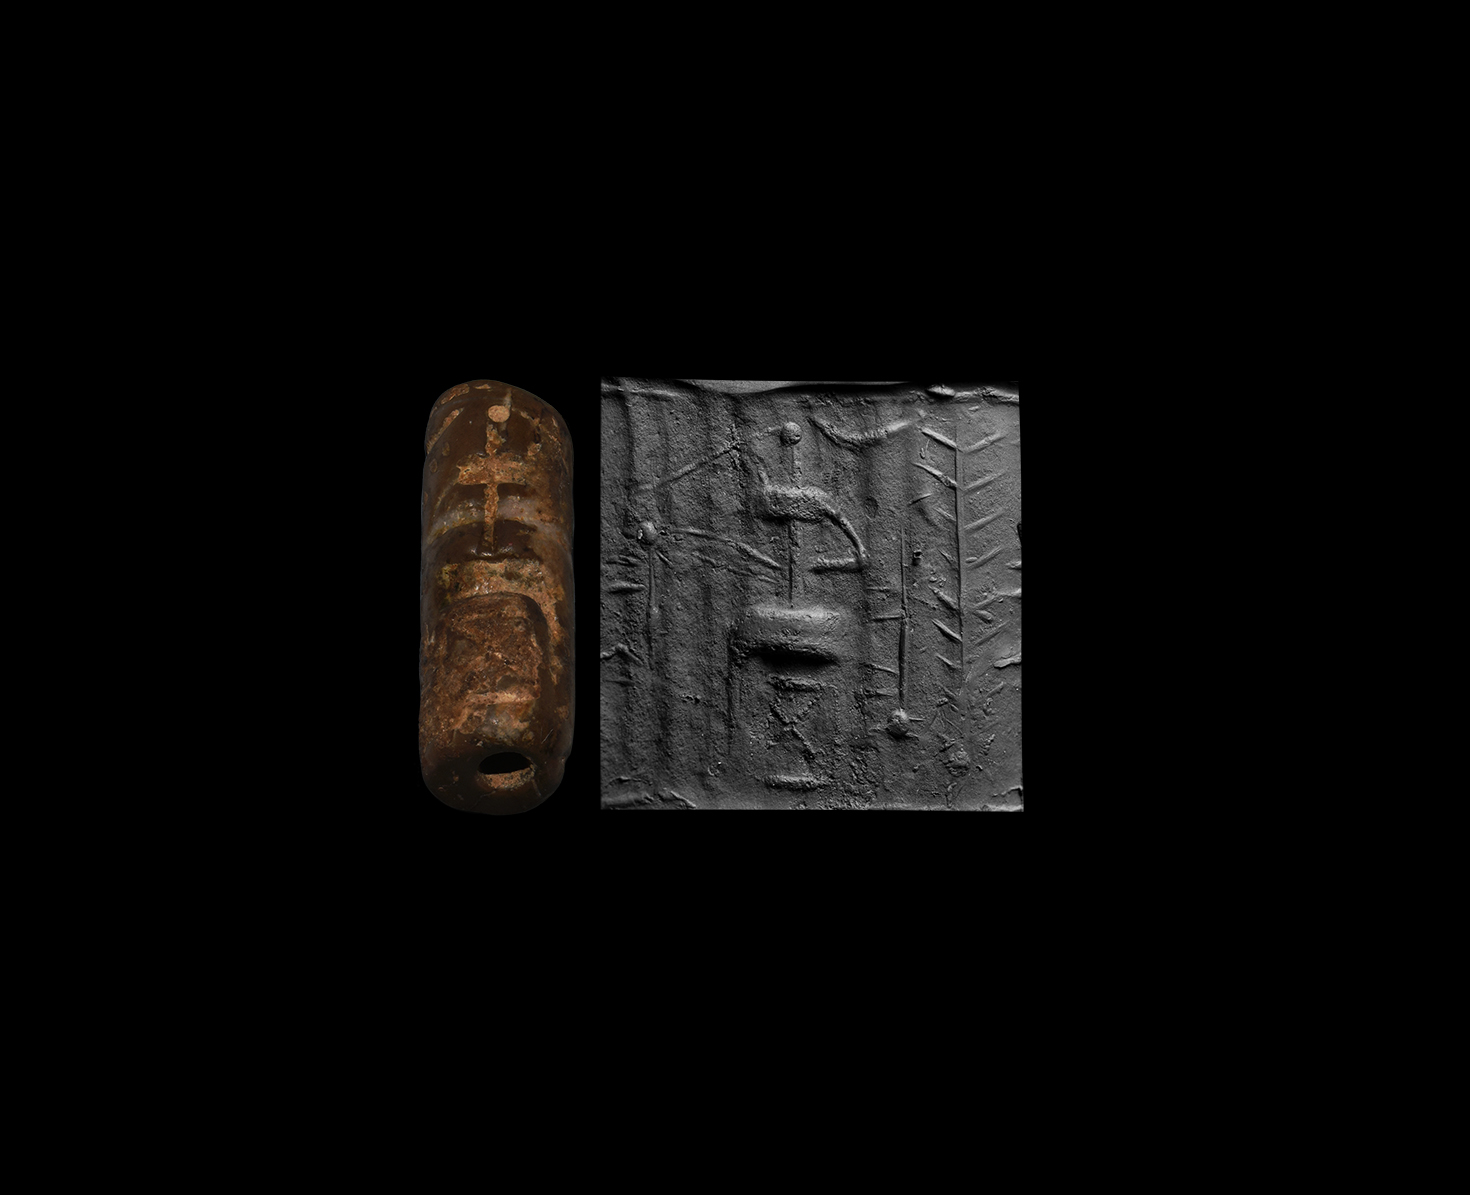 Cylinder Seal with Seated Figure